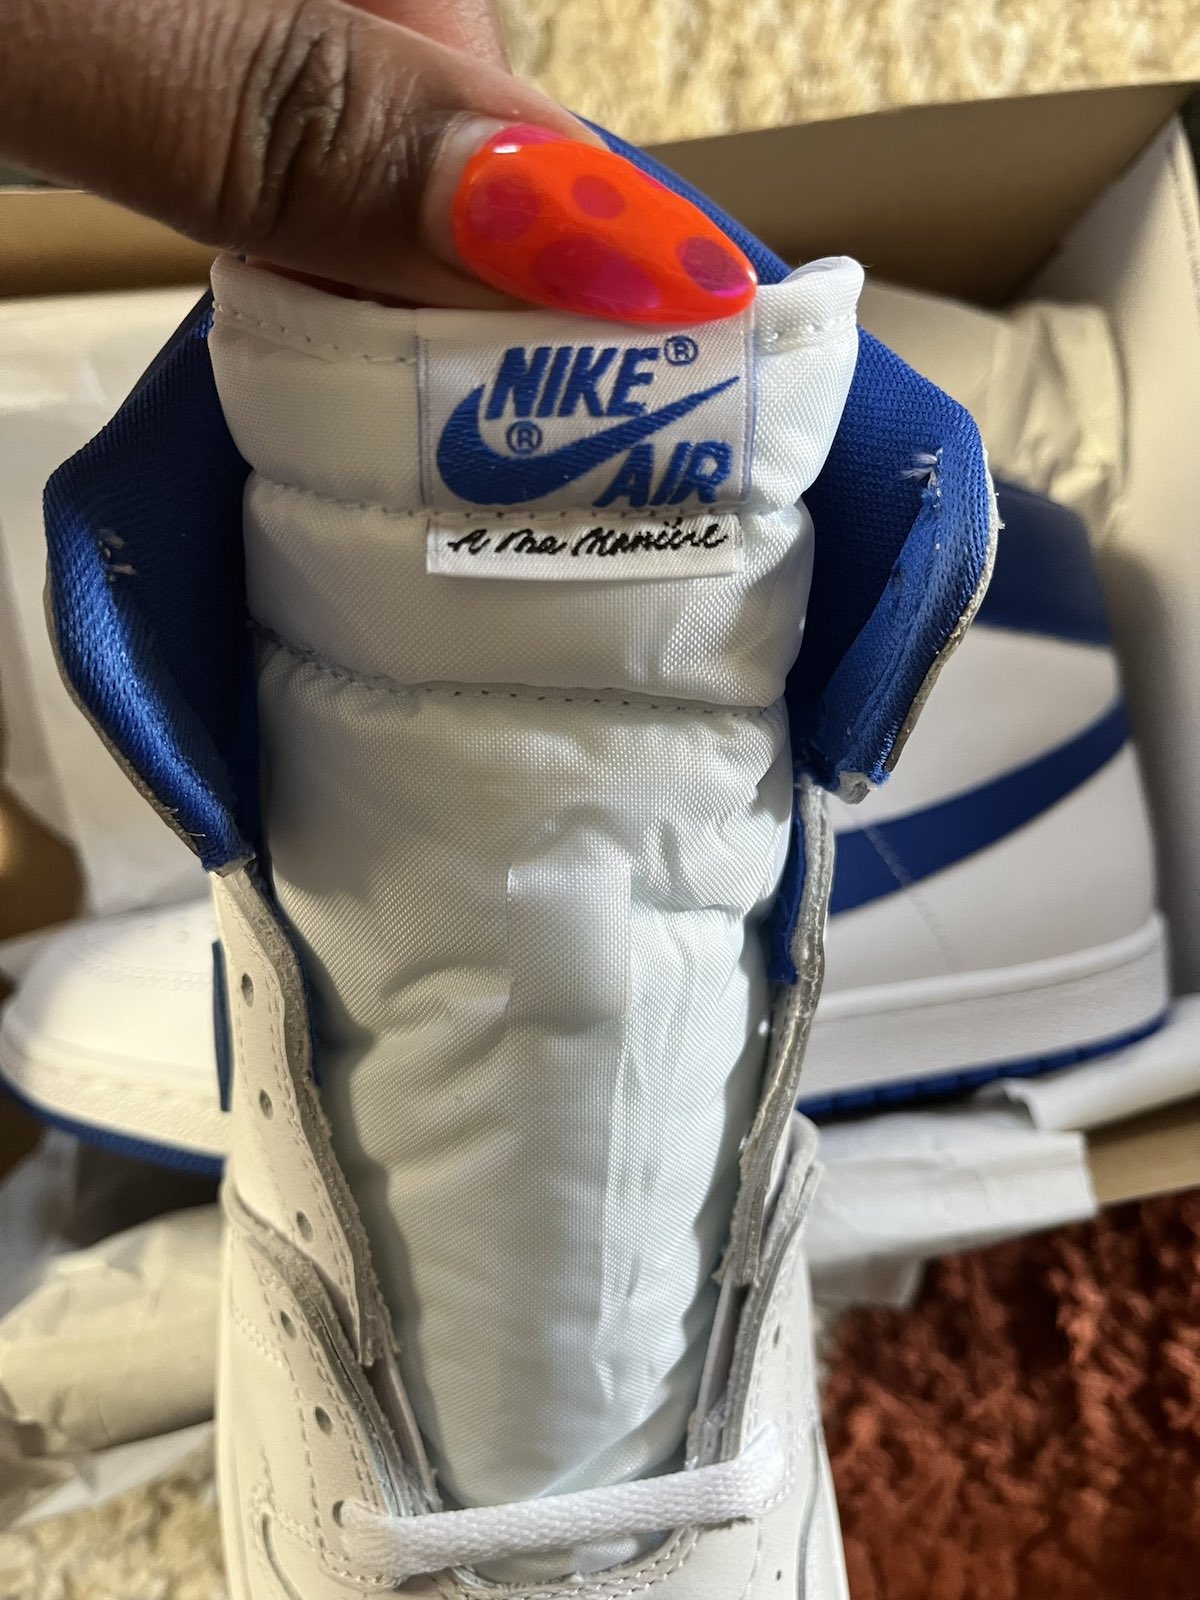 A Ma Maniere Nike Air Ship Game Royal DX4976-141 Release Date